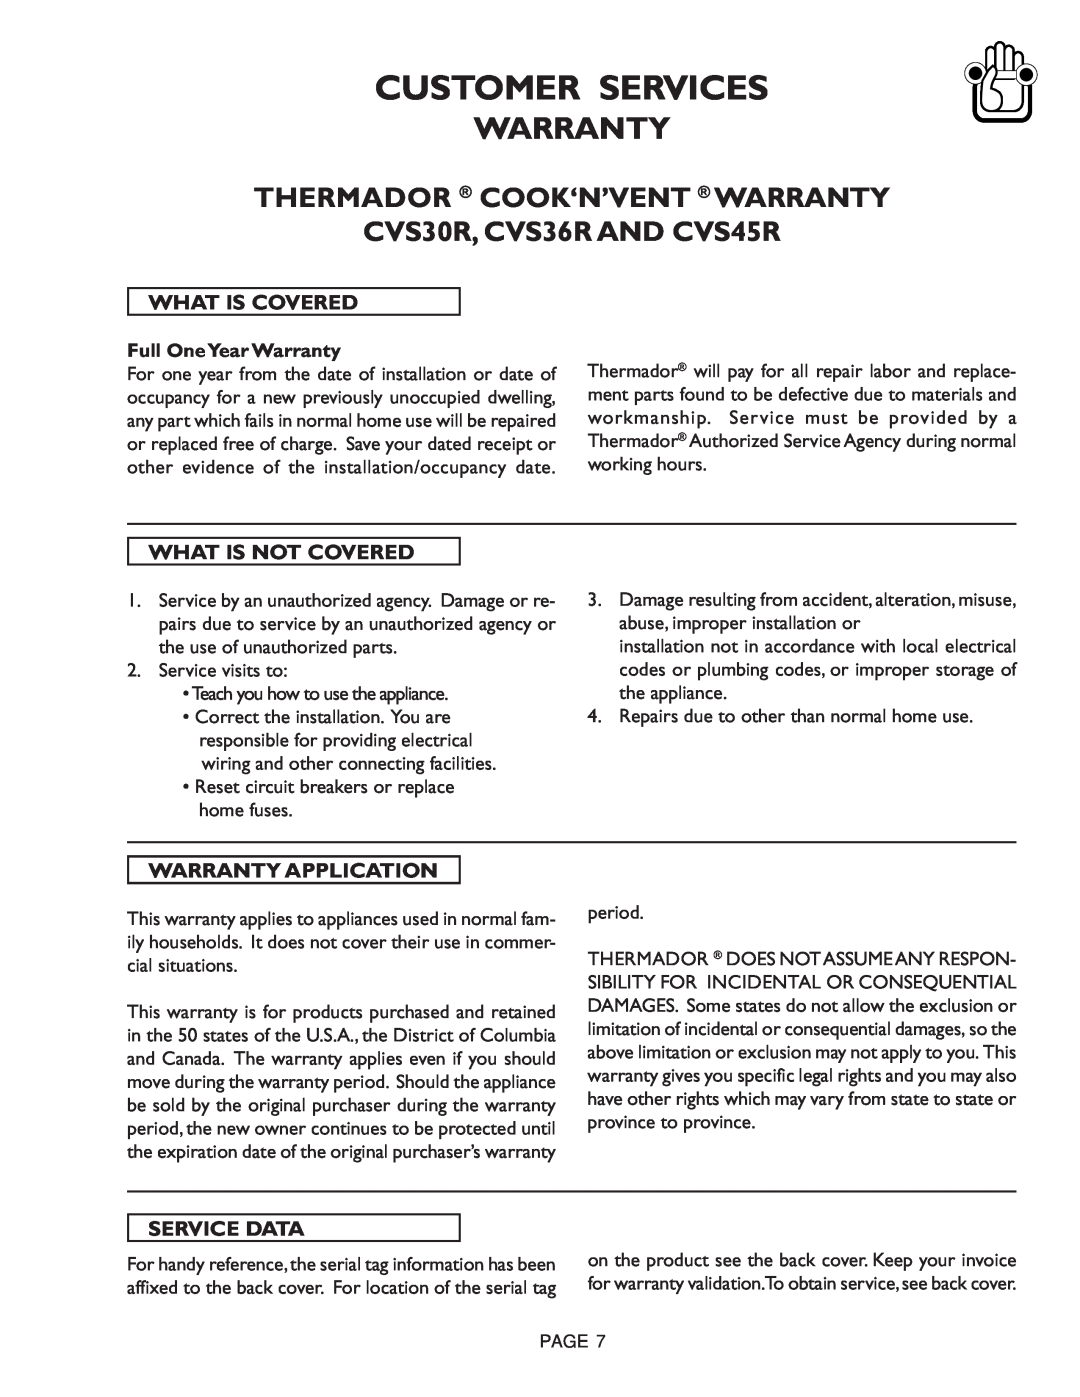 Thermador CVS36R, CVS45R Customer Services, What Is Covered, What Is Not Covered, Warranty Application, Service Data 